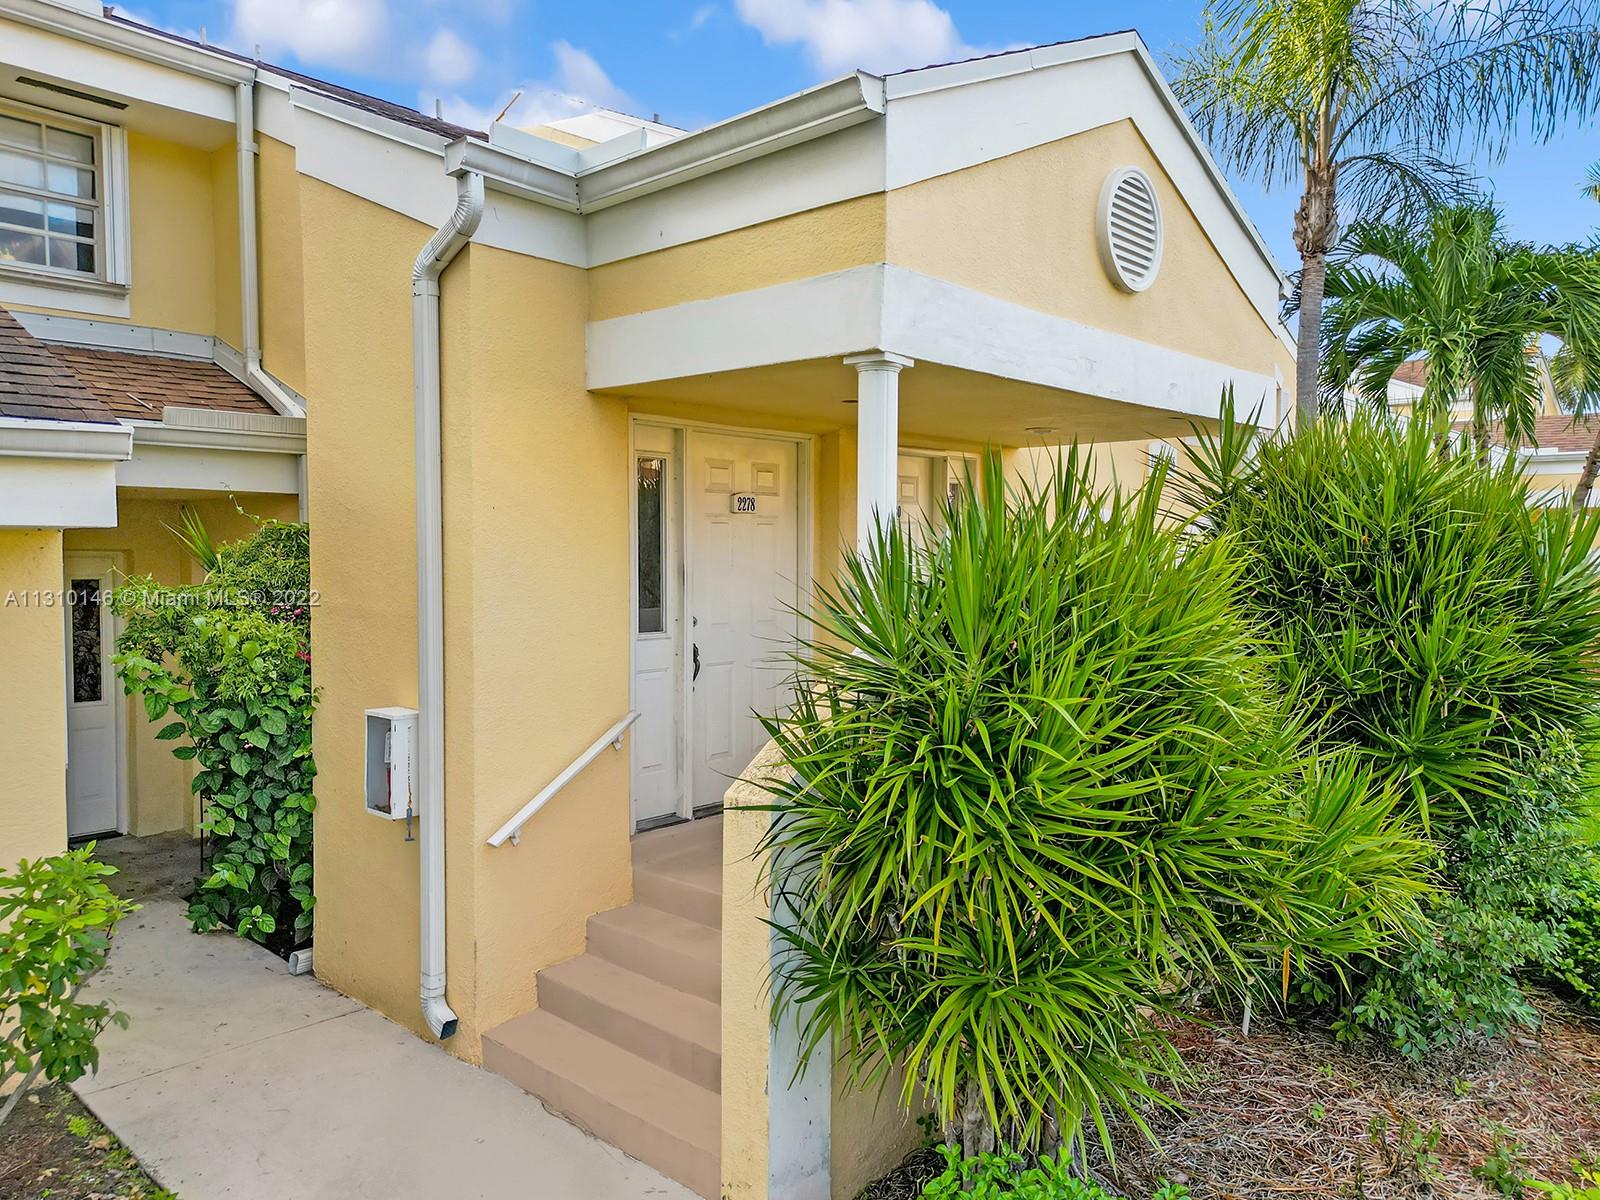 2/2 2nd floor condo located in Centergate a Keys gate Community close to shopping dining and easy access to the Florida Turnpike. HOA fees include cable, internet, water, sewer, trash, insurance and much more.